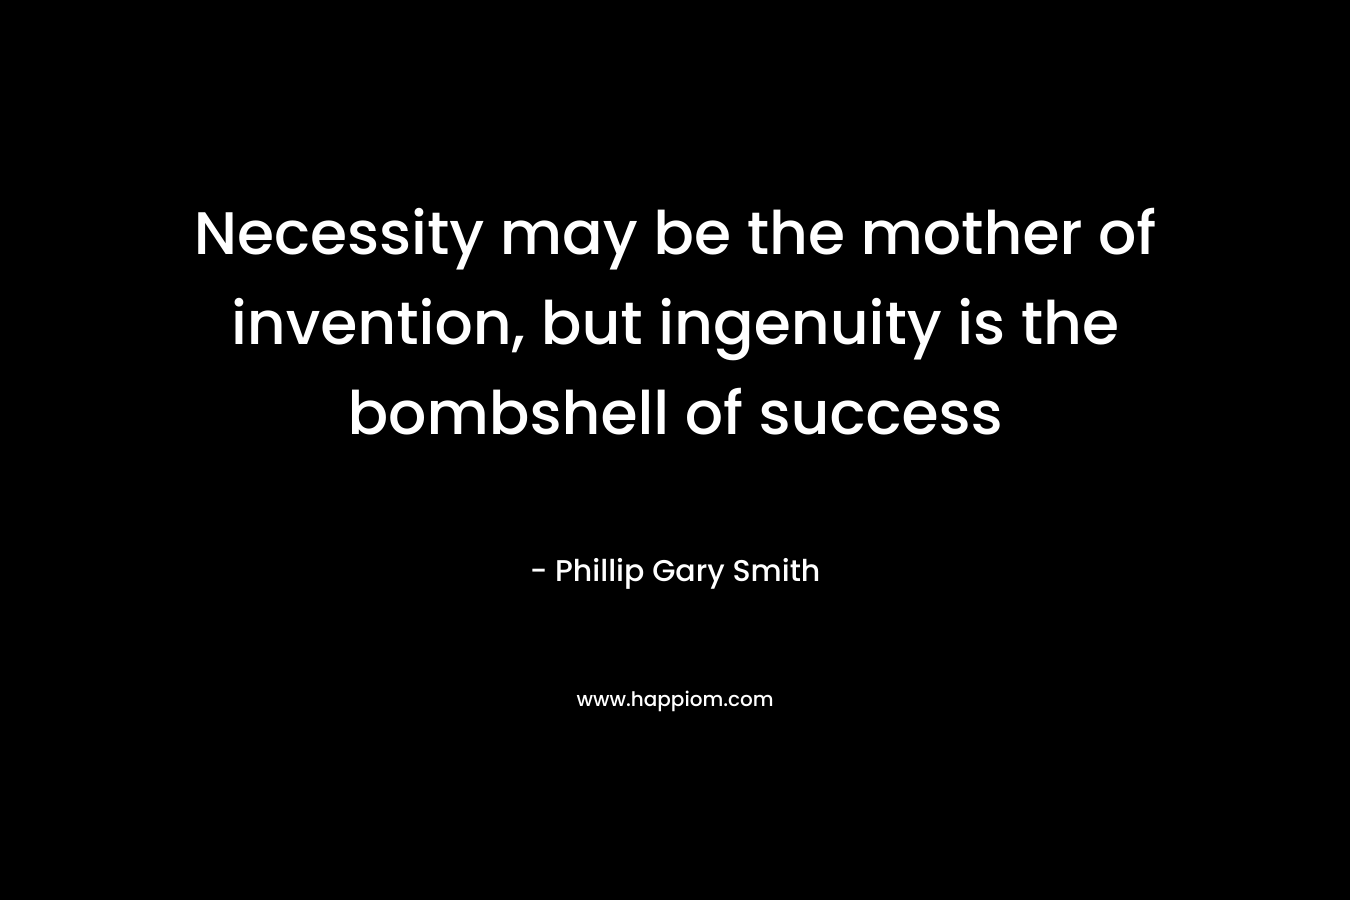 Necessity may be the mother of invention, but ingenuity is the bombshell of success